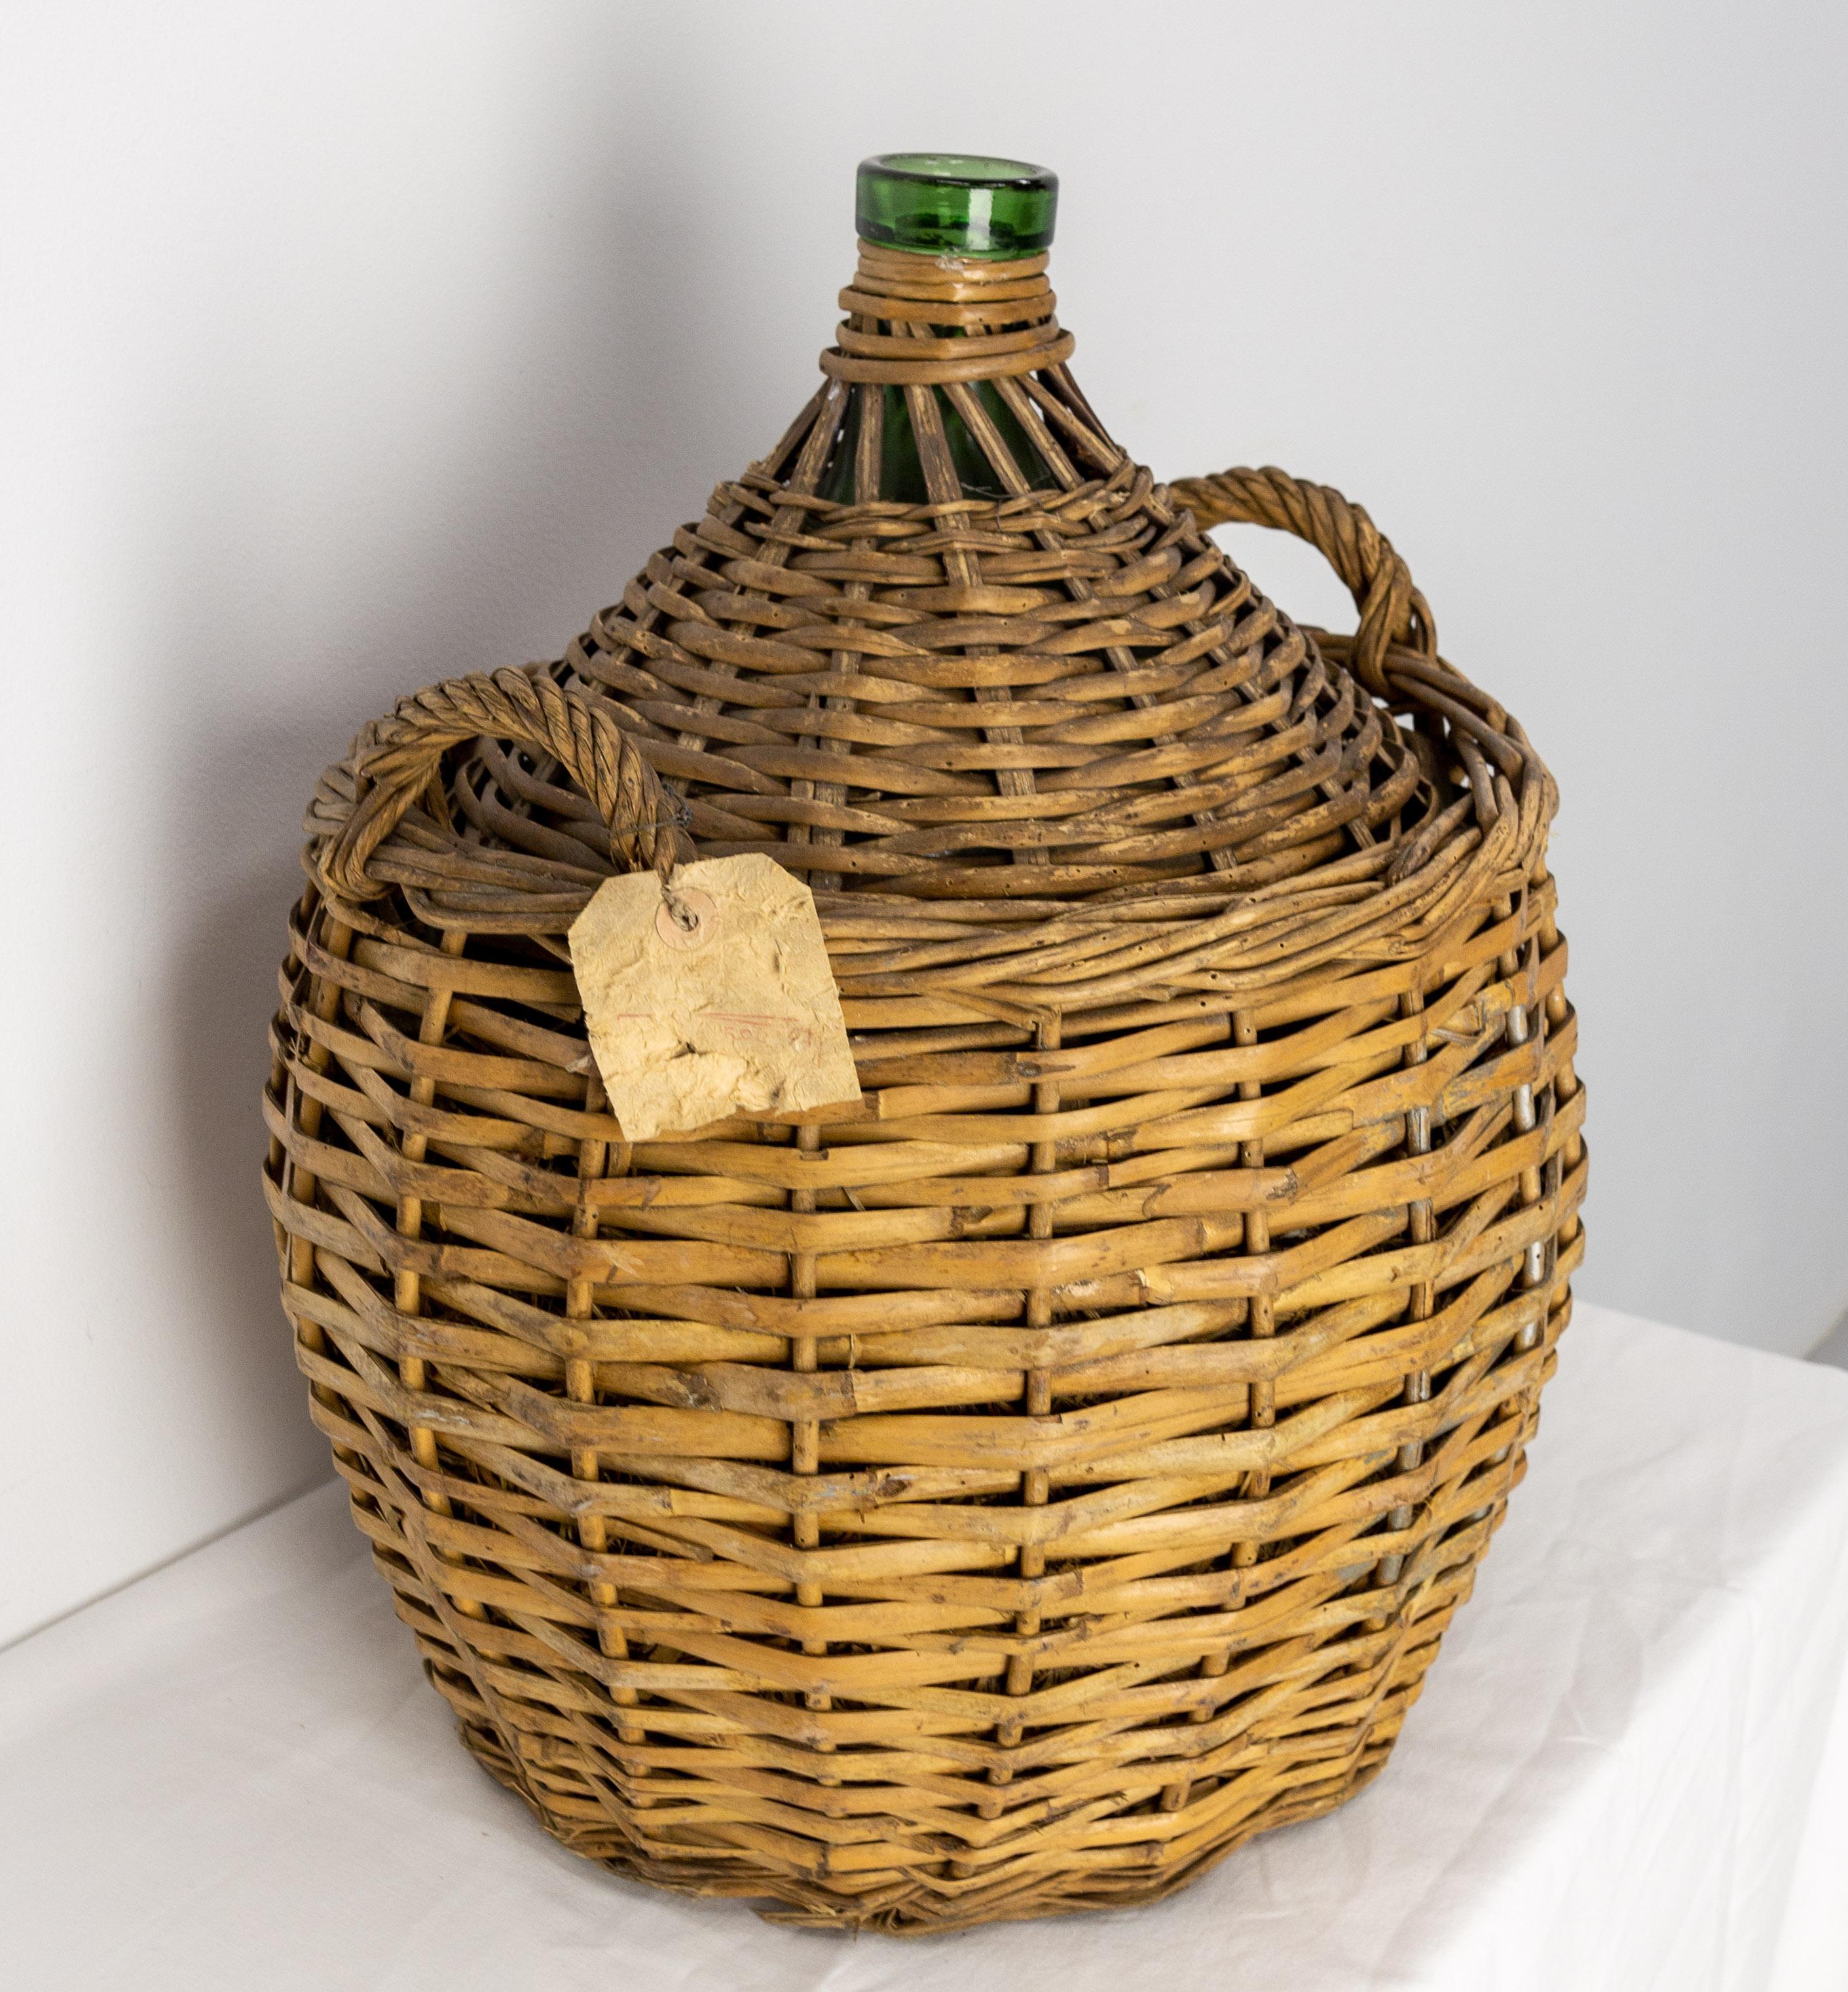 Dame Jeanne or carboy antique glass bottle demijohn.
The carboys were often protected from shocks and temperature variations into a wicker basket. Between the bascket and the bottle, some straw was added (please look on photos).
This king of